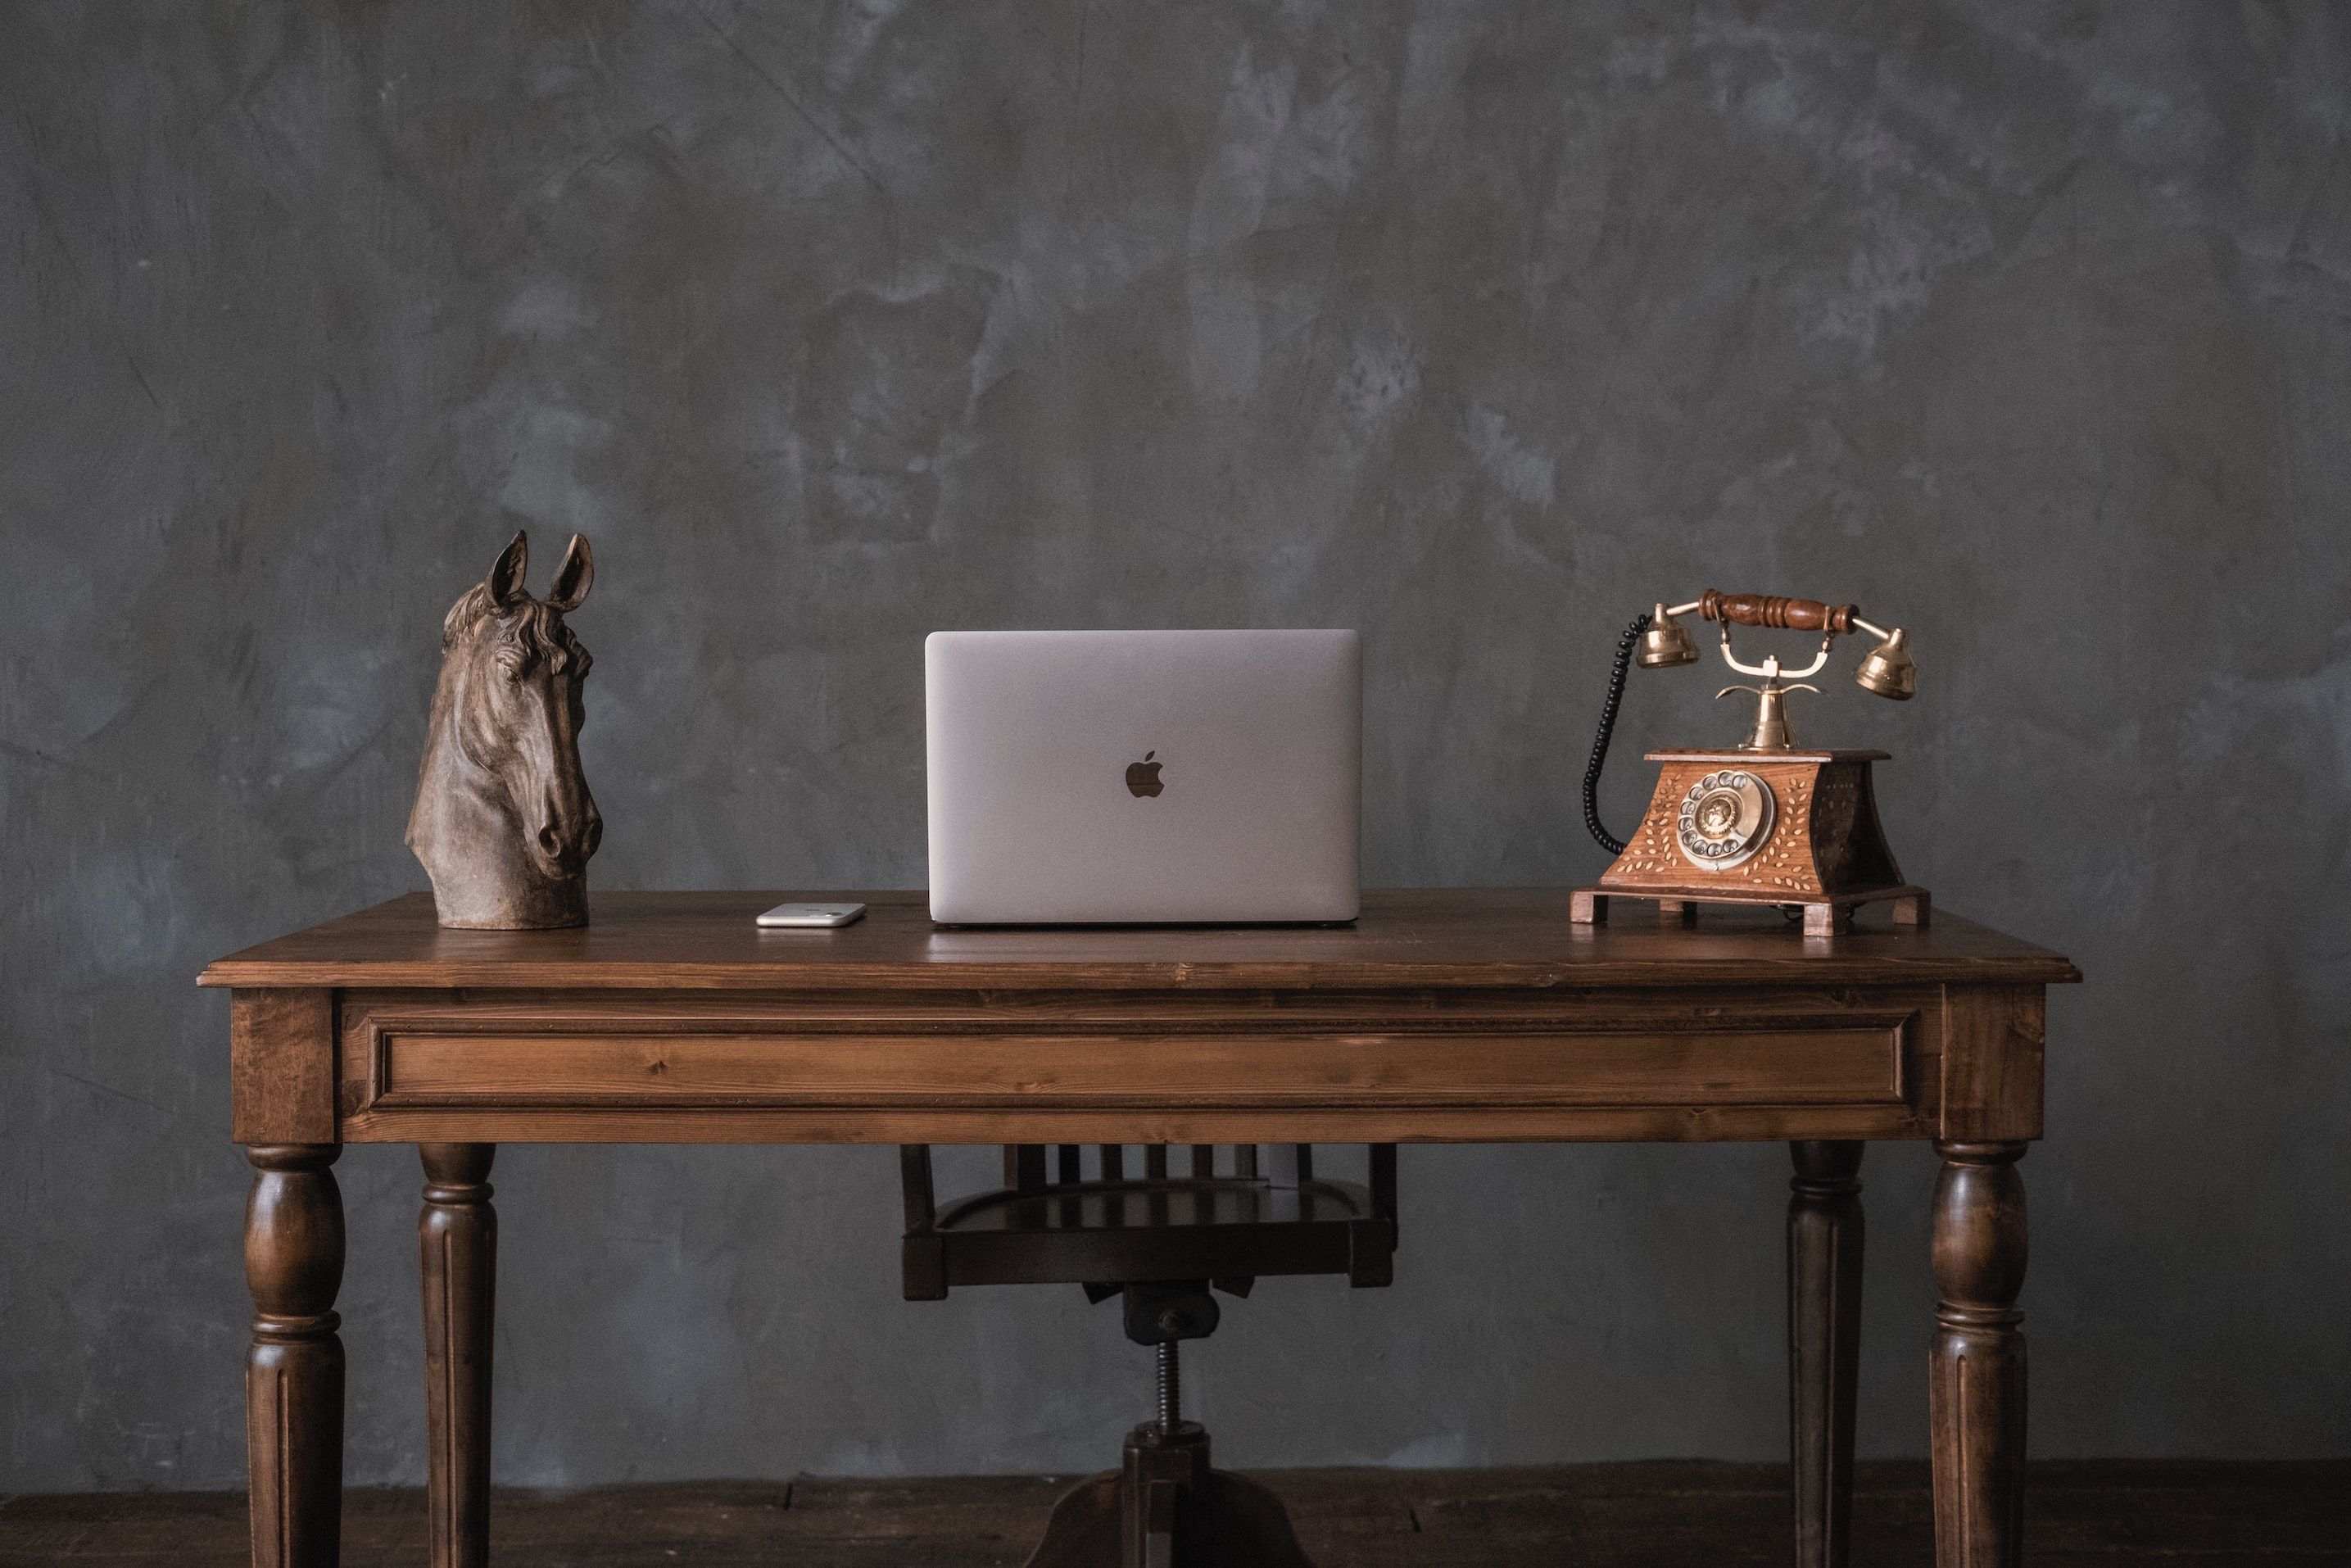 Horse-head sculpture, MacBook, and dial phone atop traditional wooden desk in a dark gray room